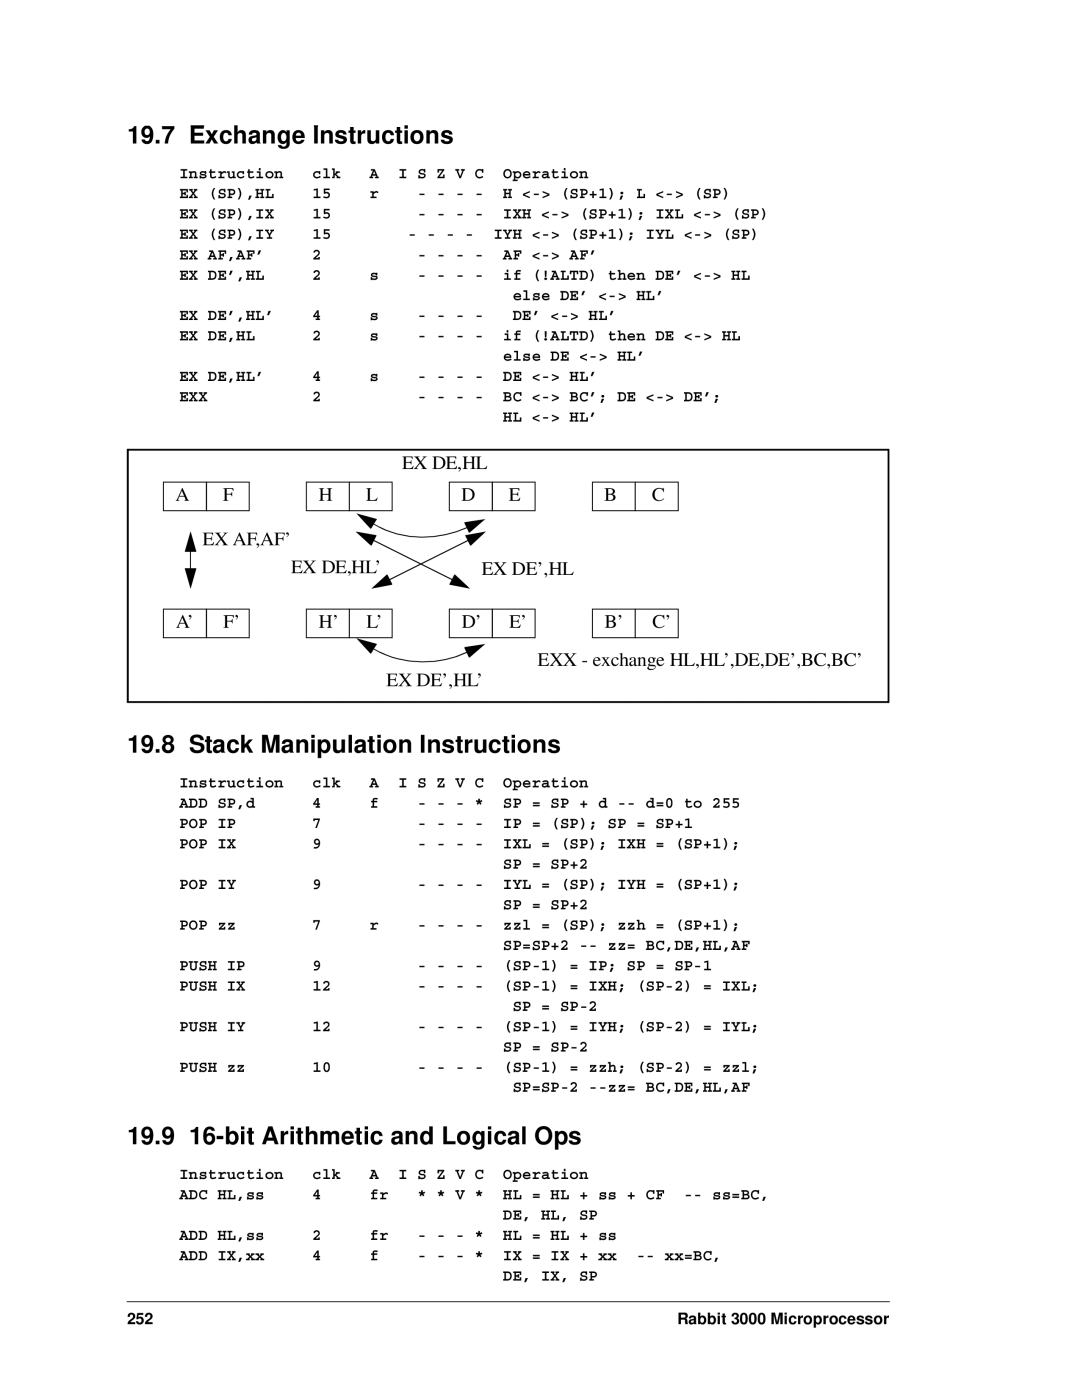 Jameco Electronics 2000 Exchange Instructions, Stack Manipulation Instructions, 19.9 16-bitArithmetic and Logical Ops 